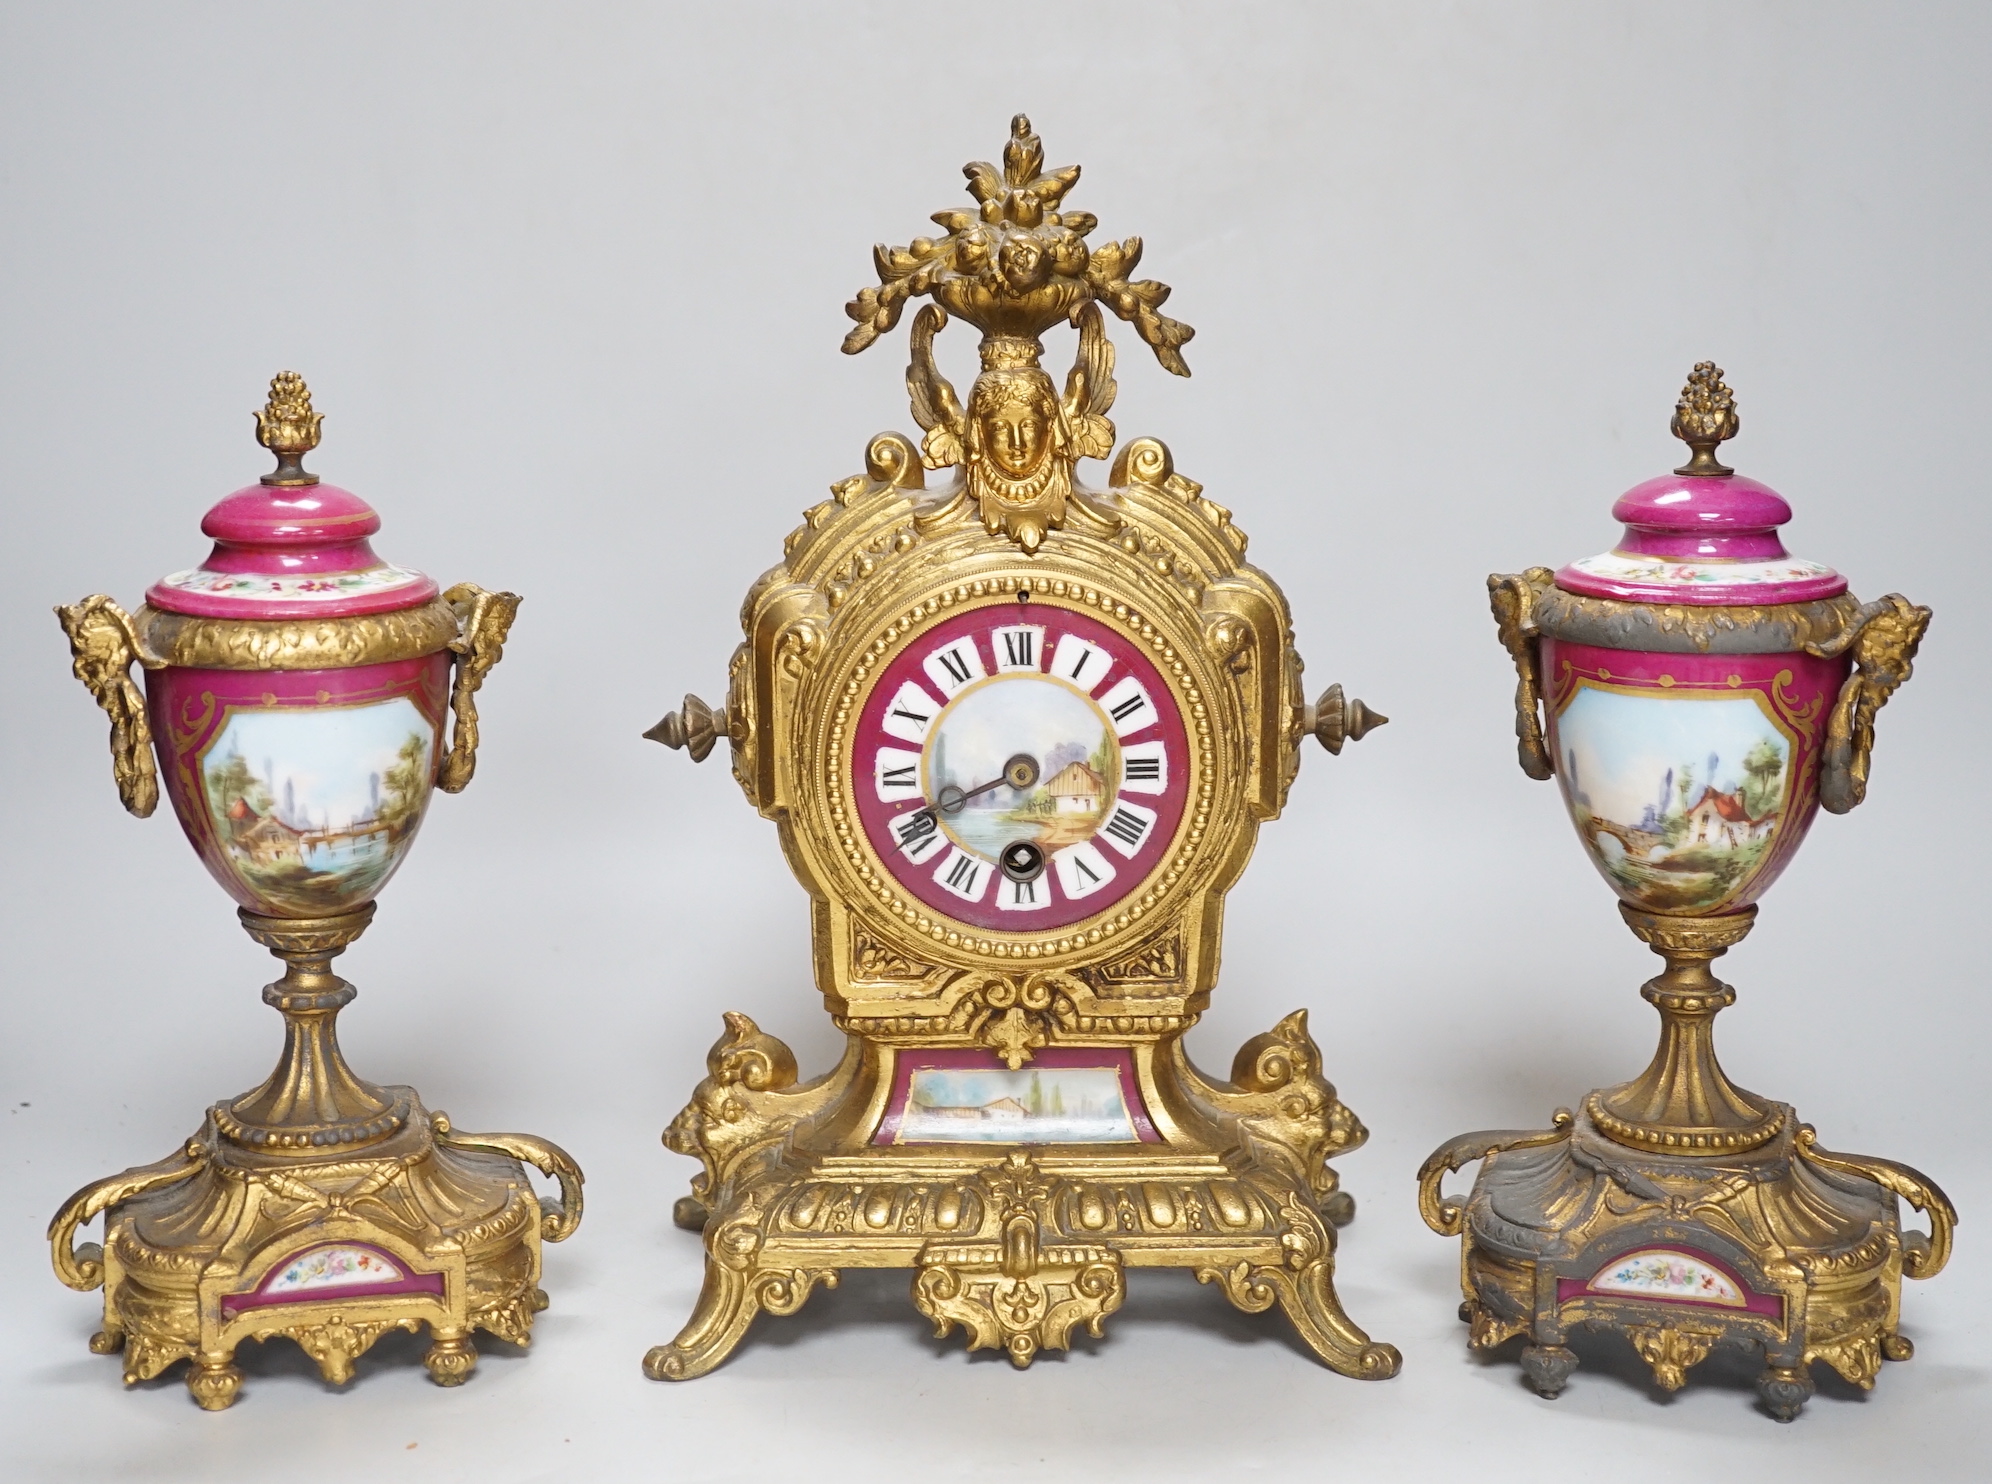 A 19th century porcelain mounted gilt spelter clock garniture, hand painted with landscapes, 30cm high